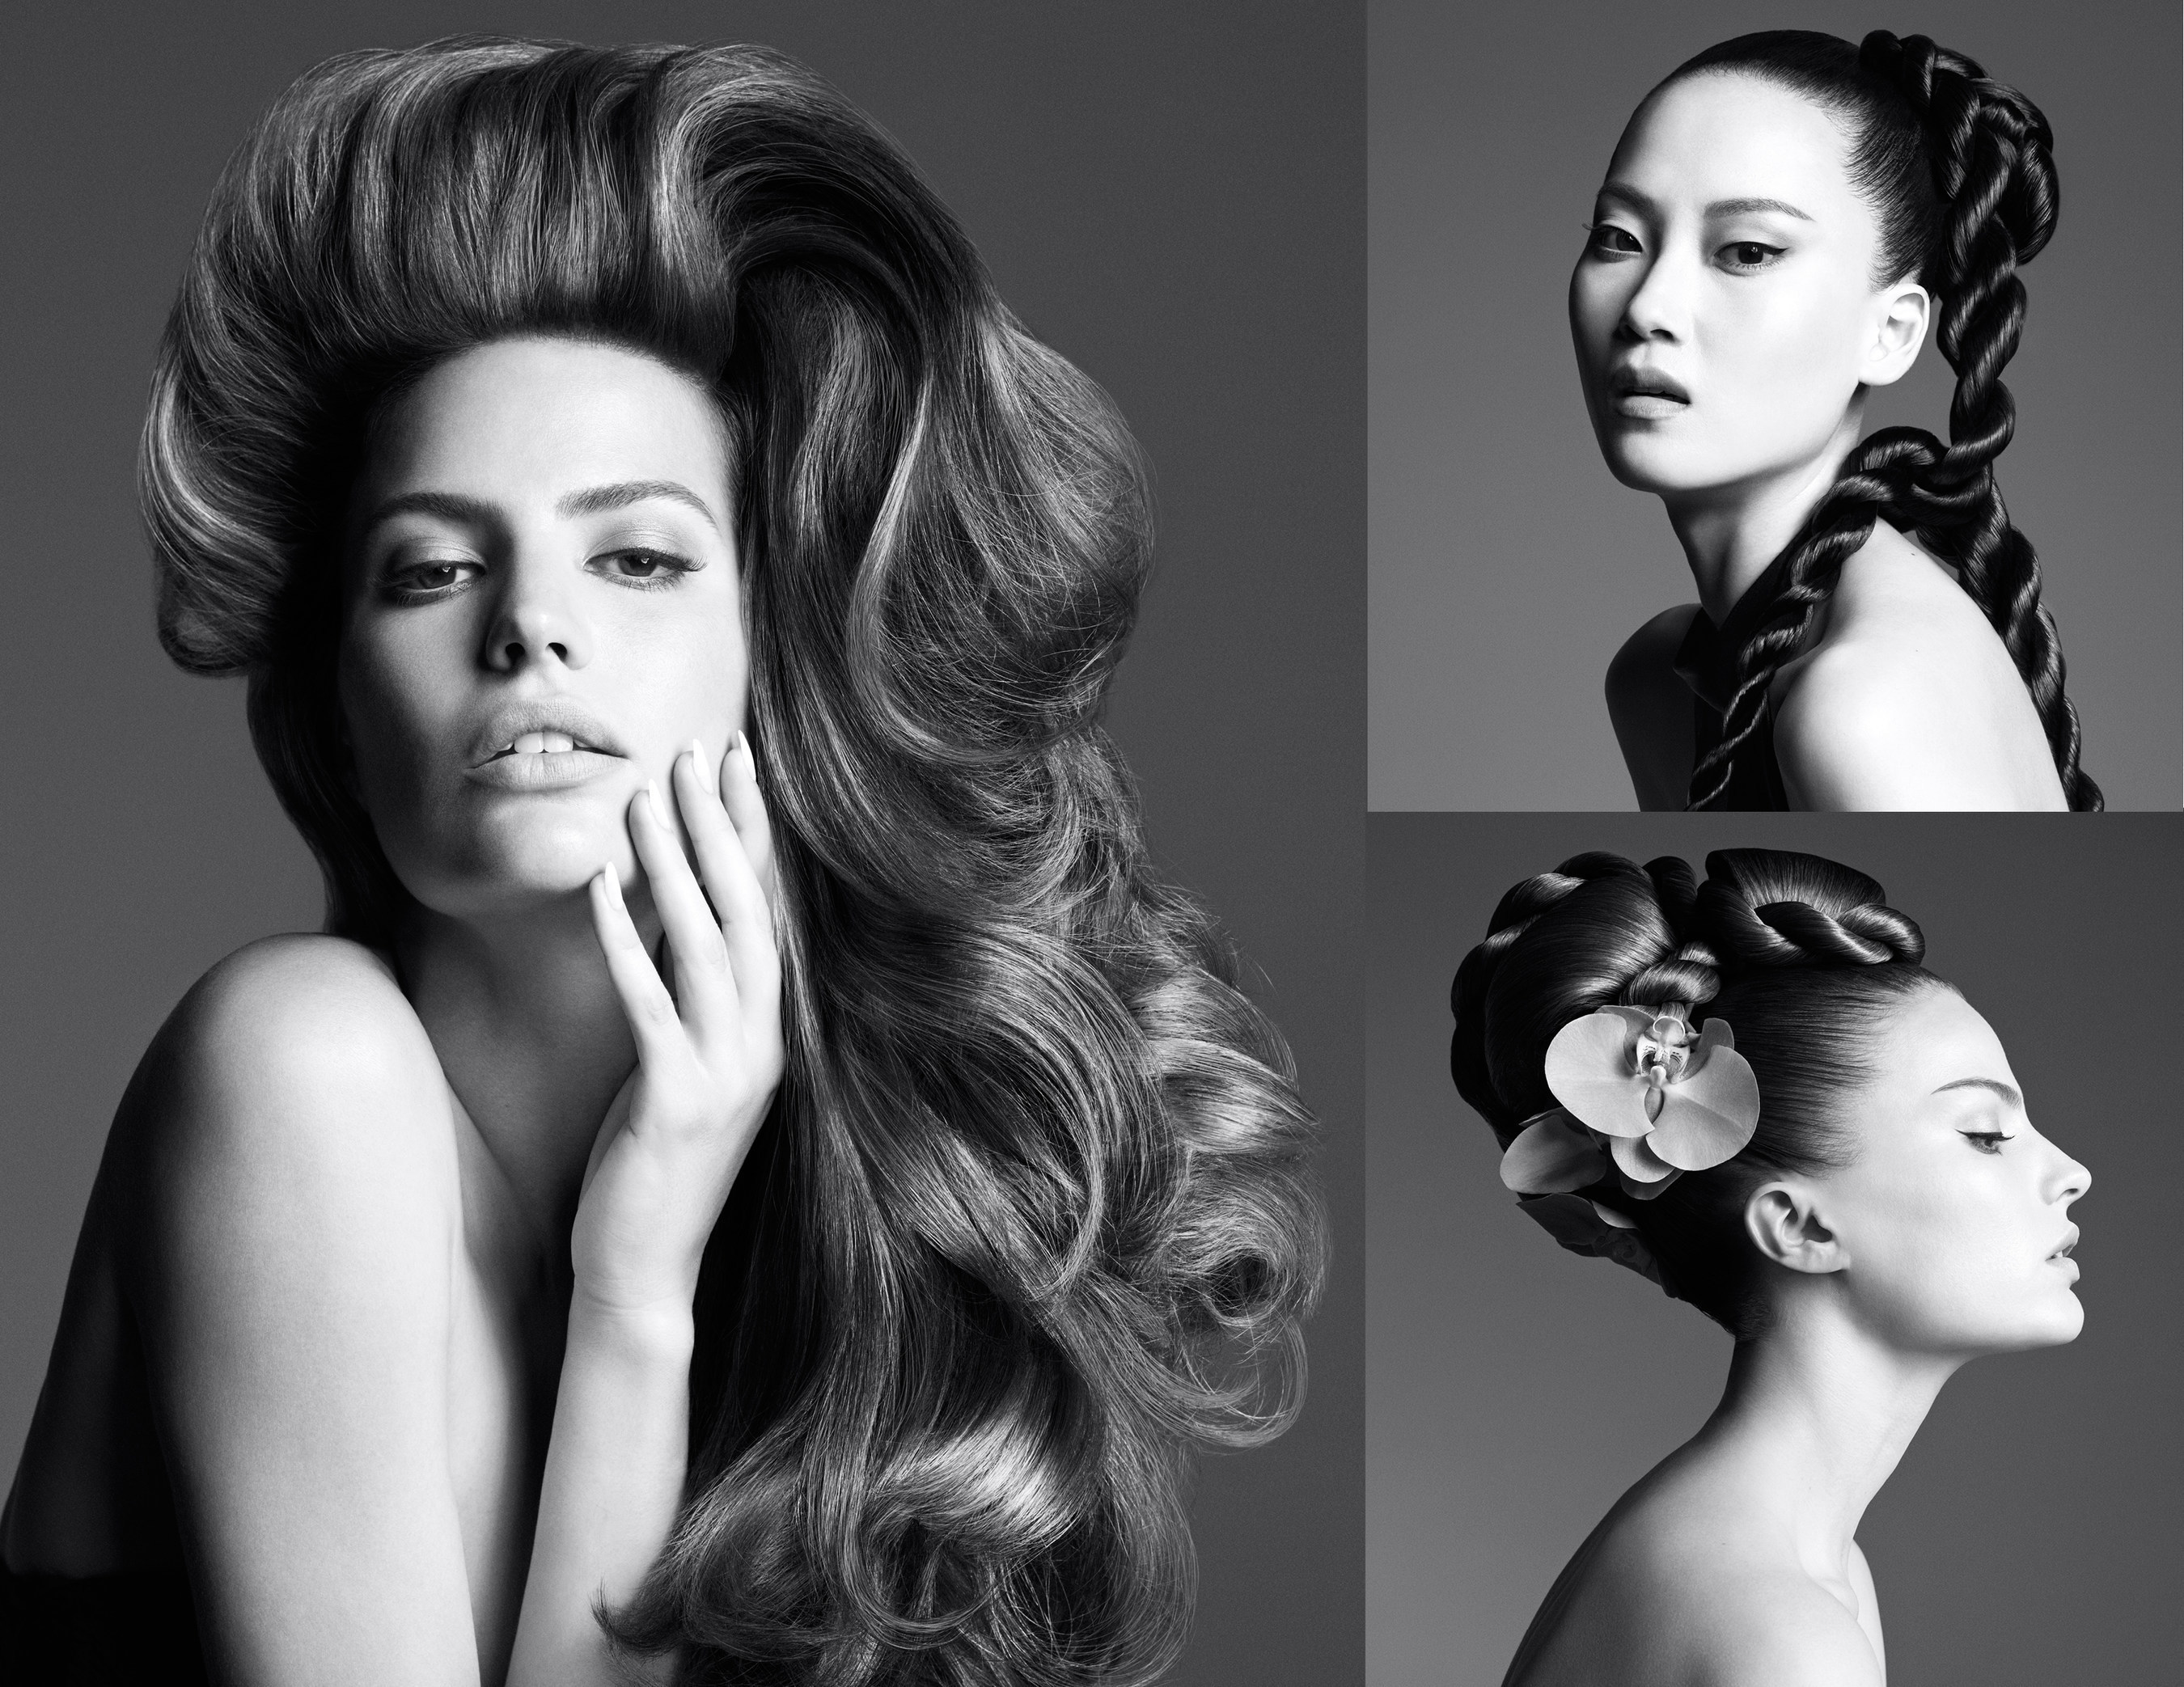 Kerastase Couture Styling: Visions of Style